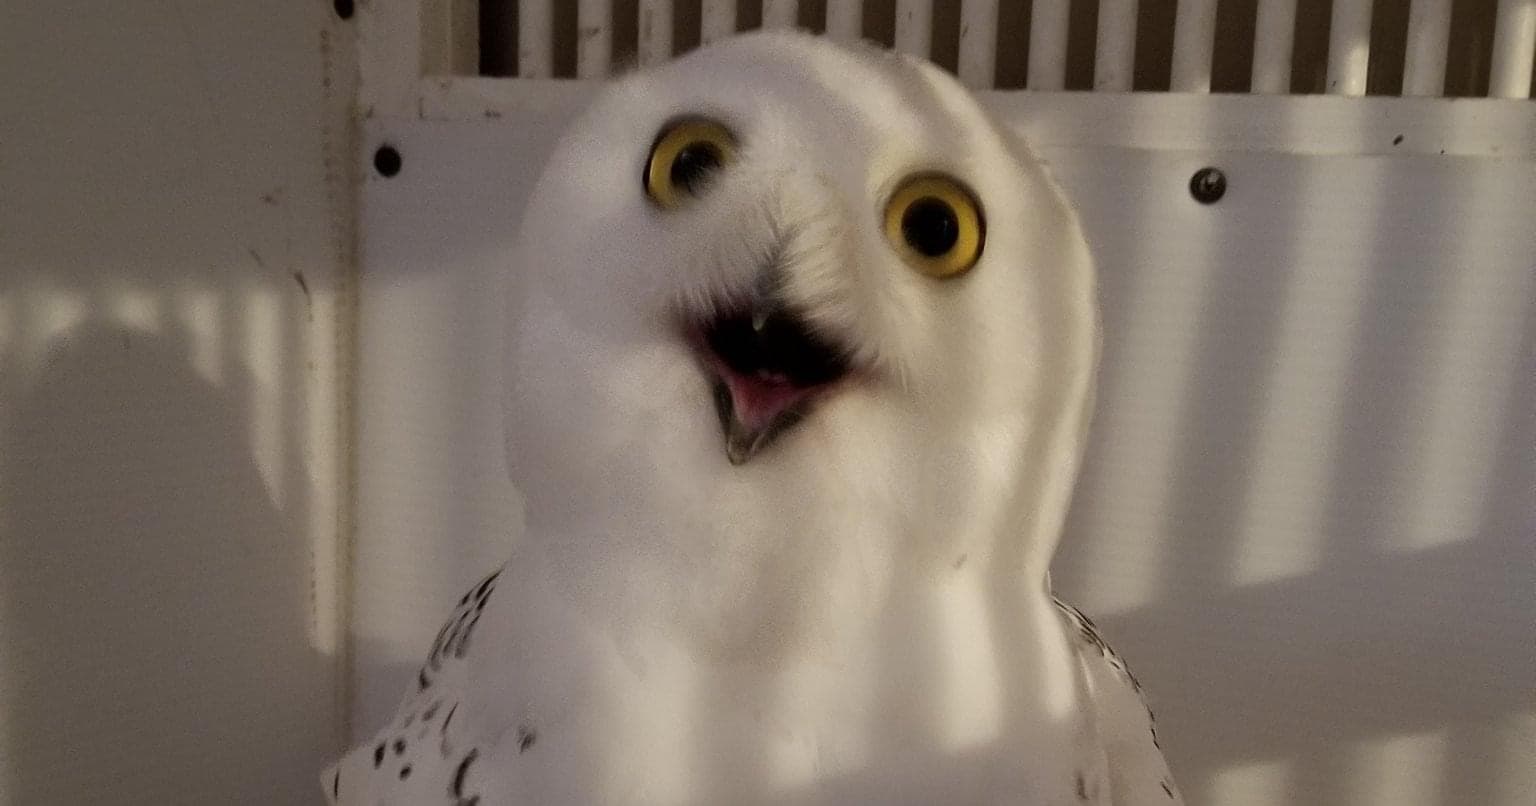 A white owl in a bird cage. Its beak is open and it’s looking at the camera.  